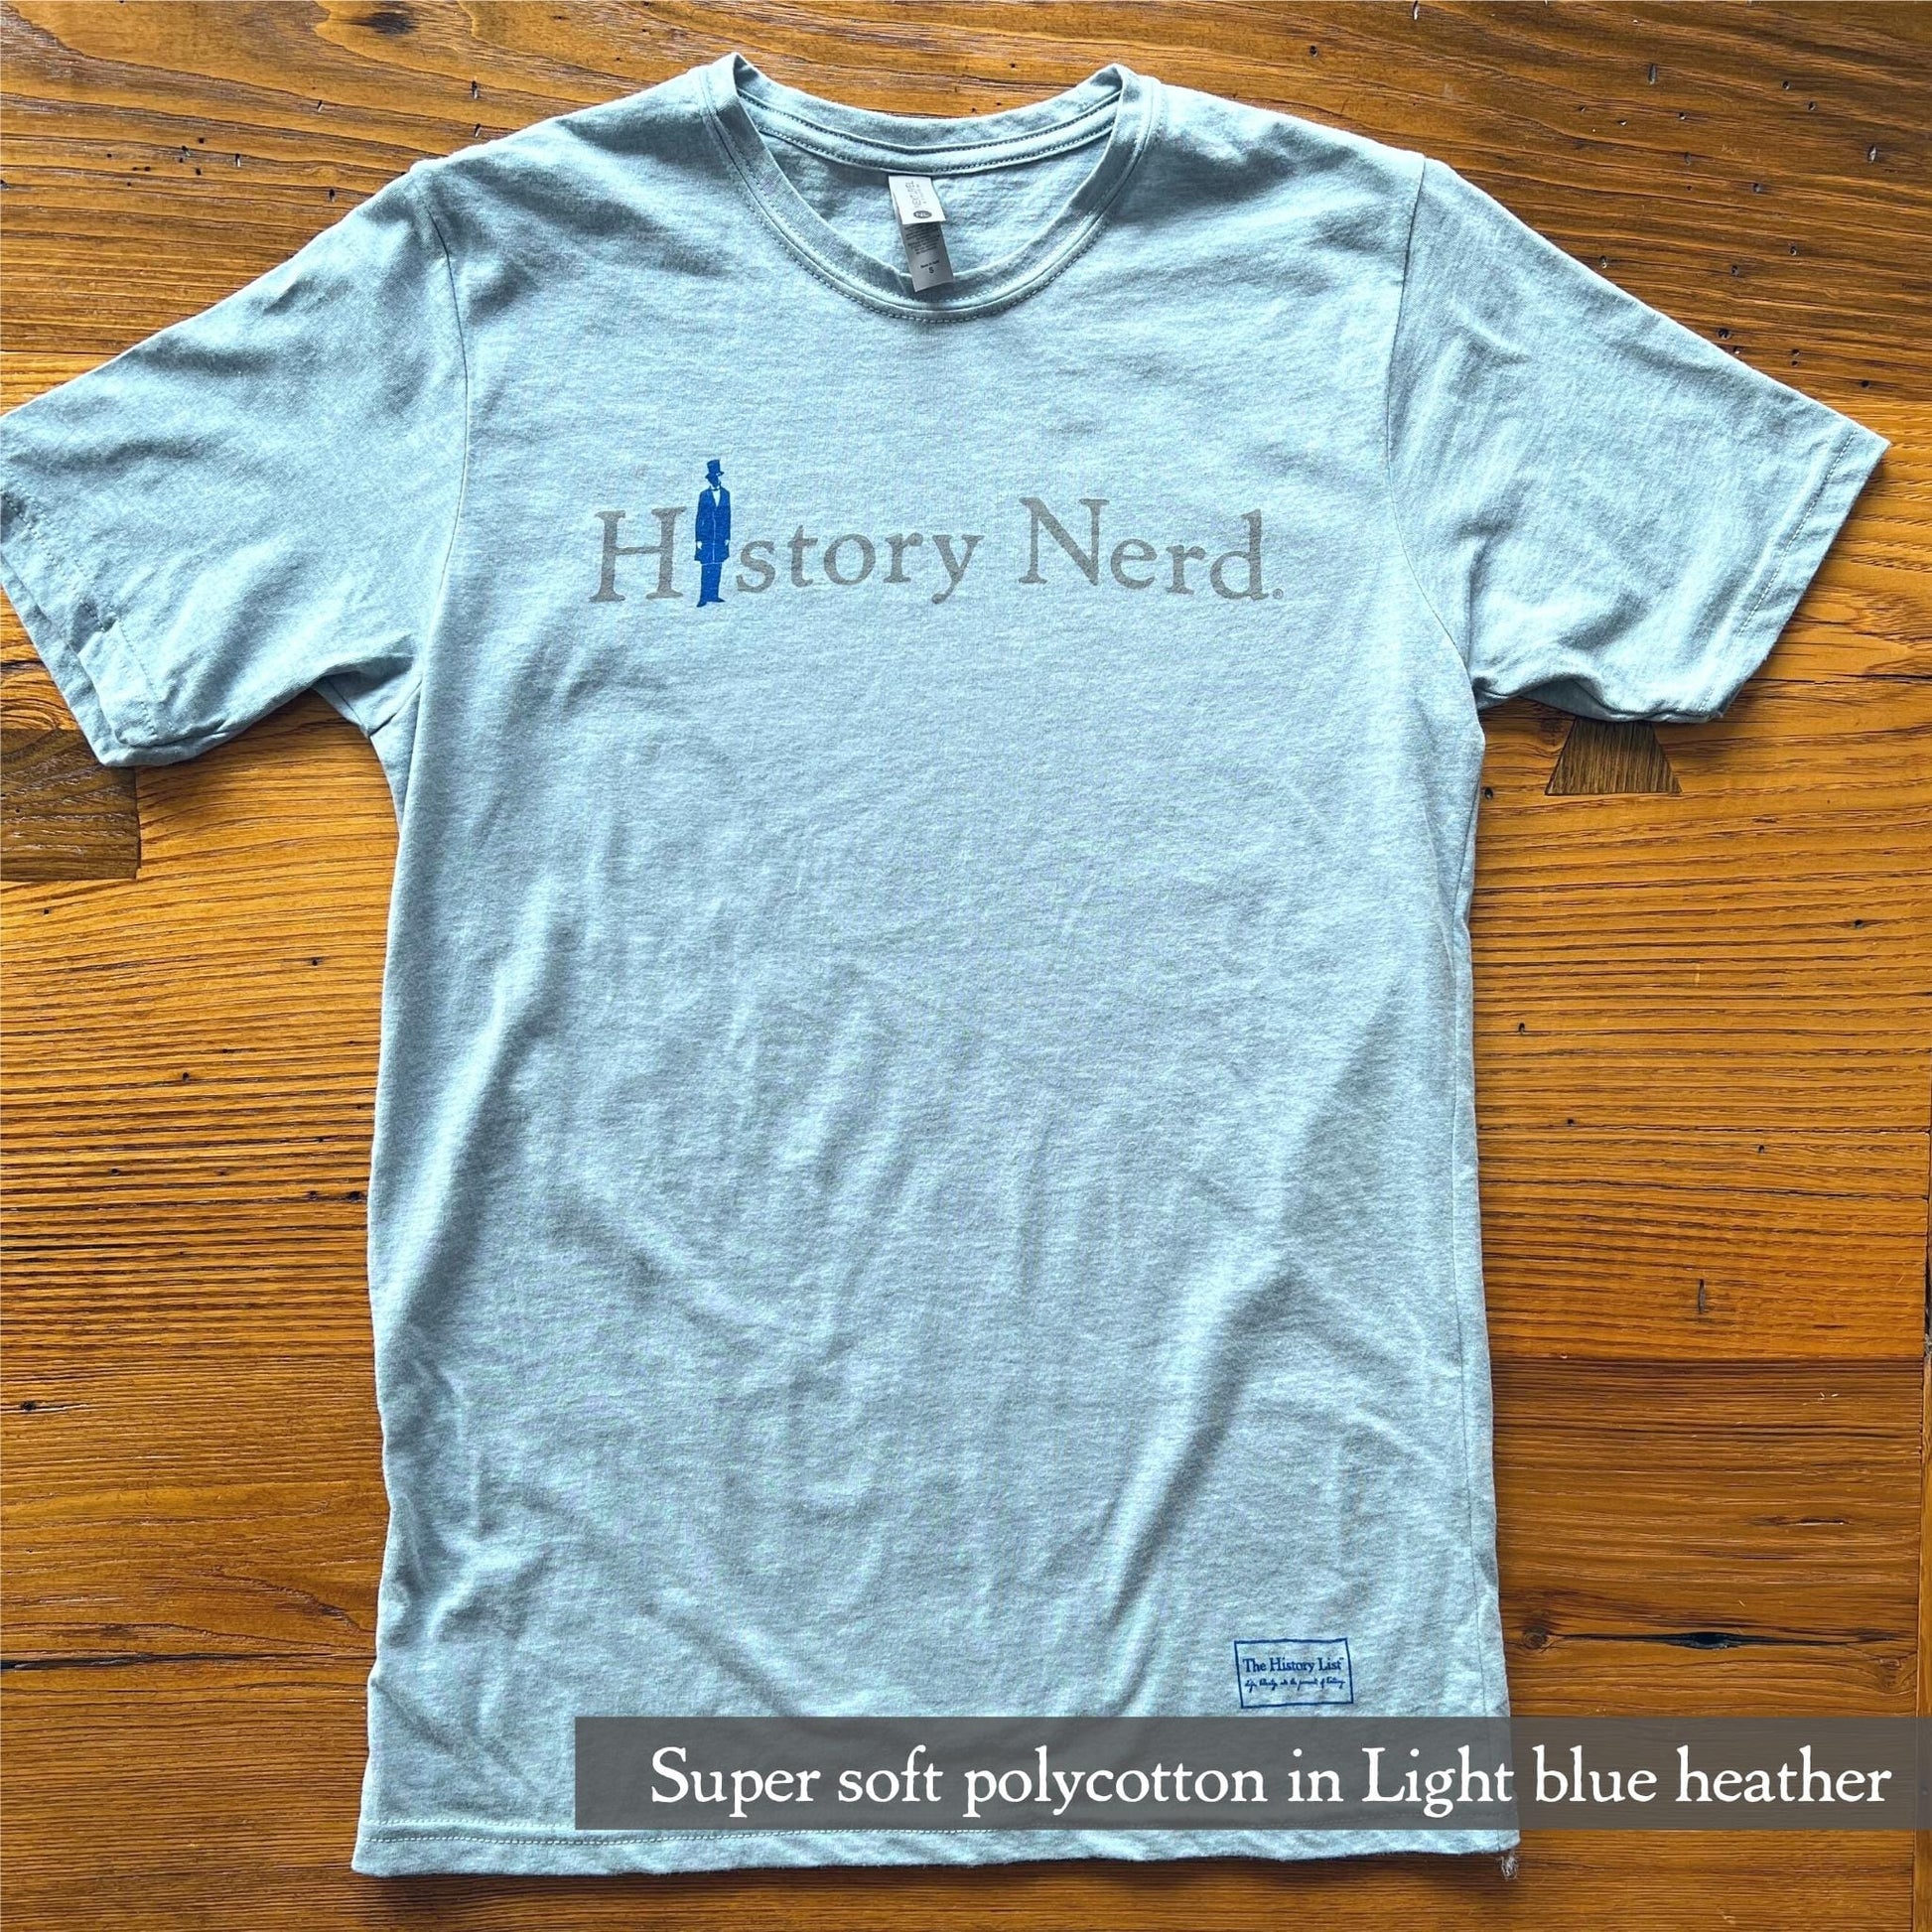 "History Nerd" shirt with Abraham Lincoln in Light blue heather from The History List store